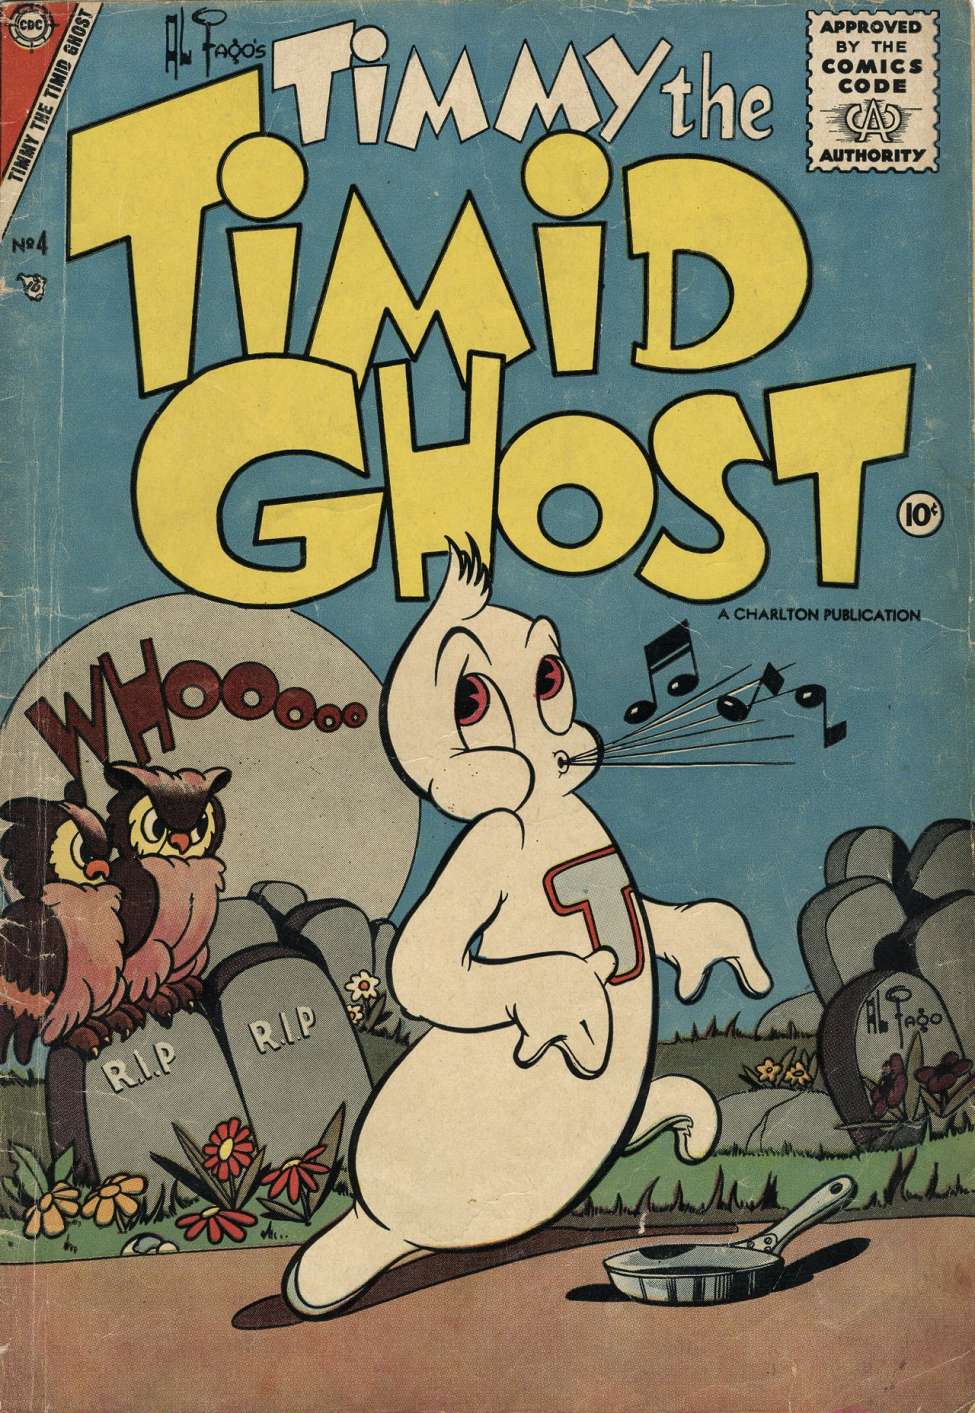 Timmy Le timide Ghost #4 2nd Series Charlton Comics 1968 